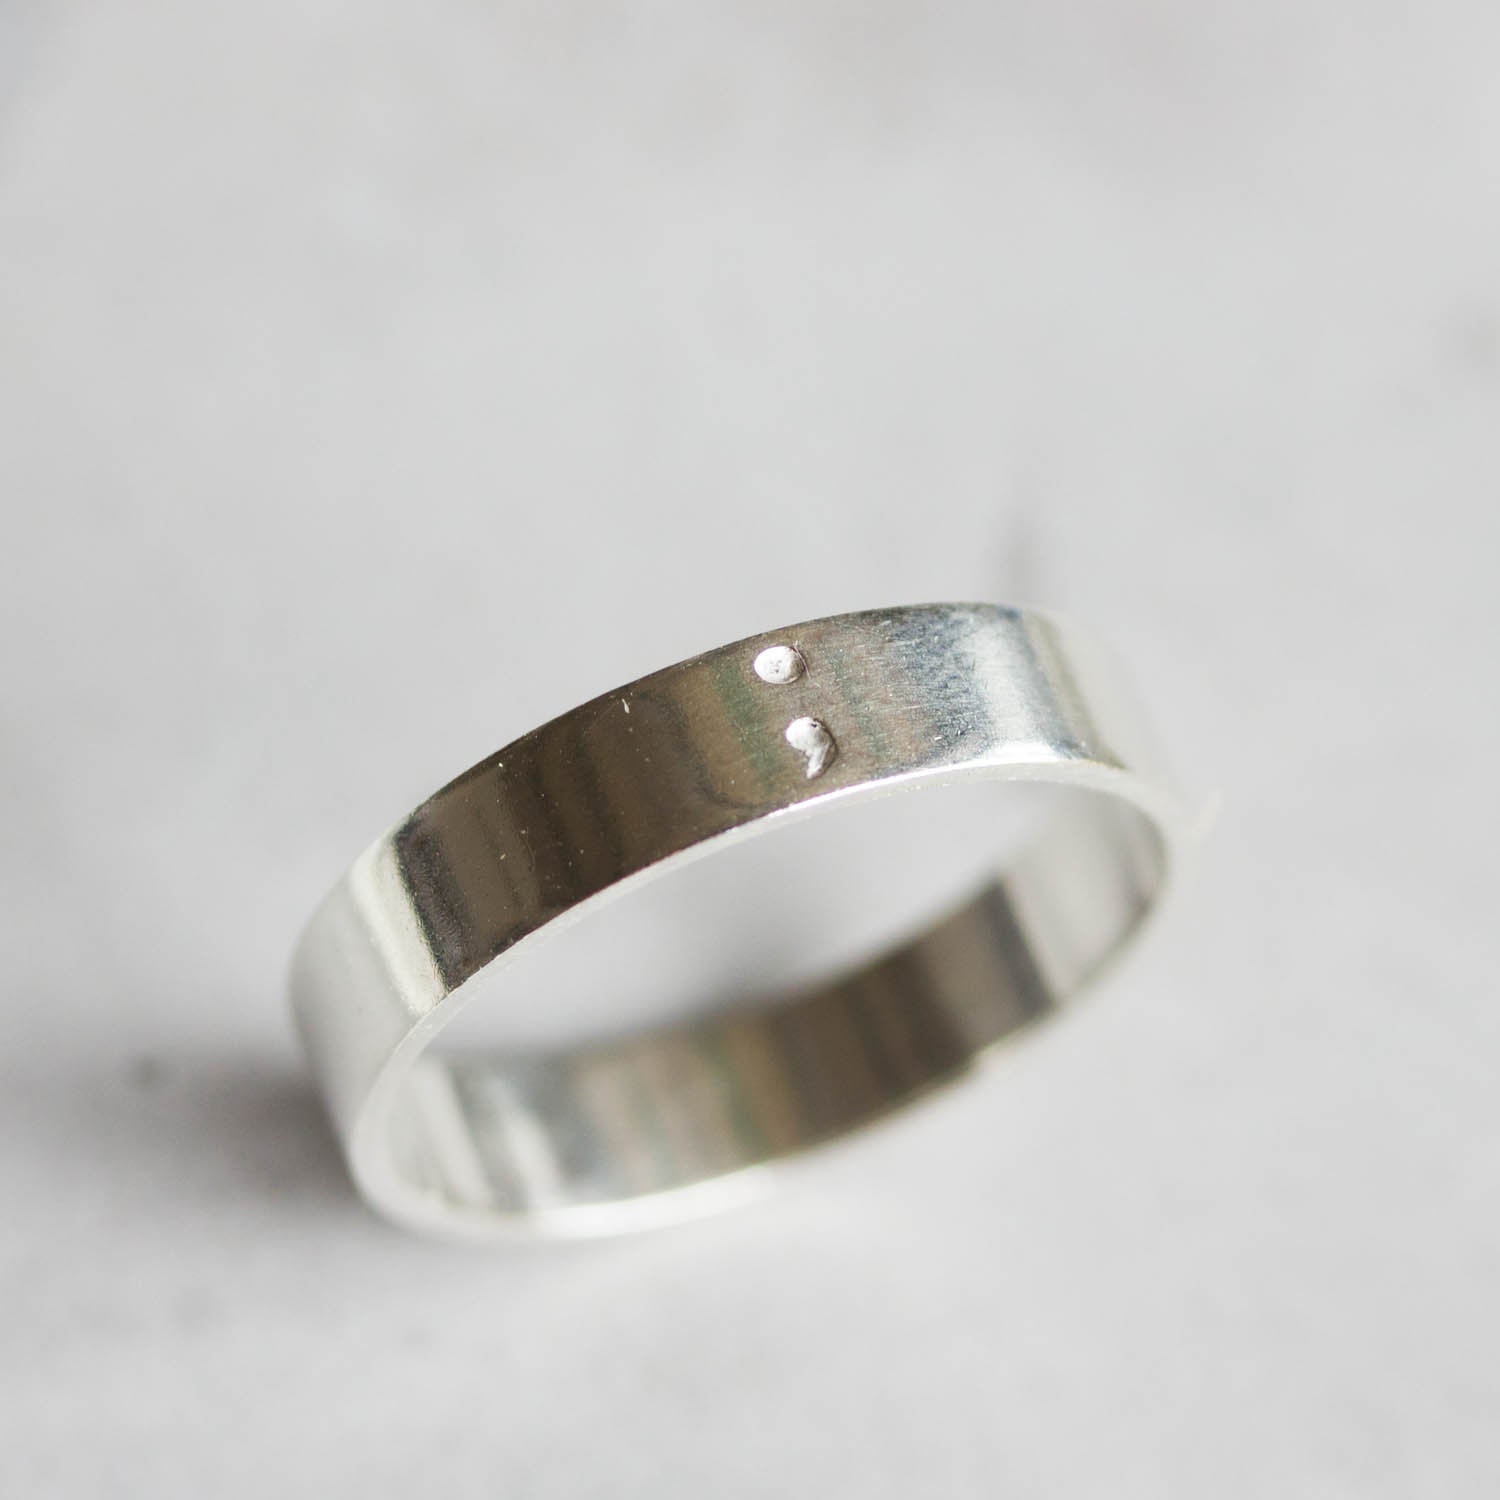 Semicolon ring - hand stamped sterling silver ring